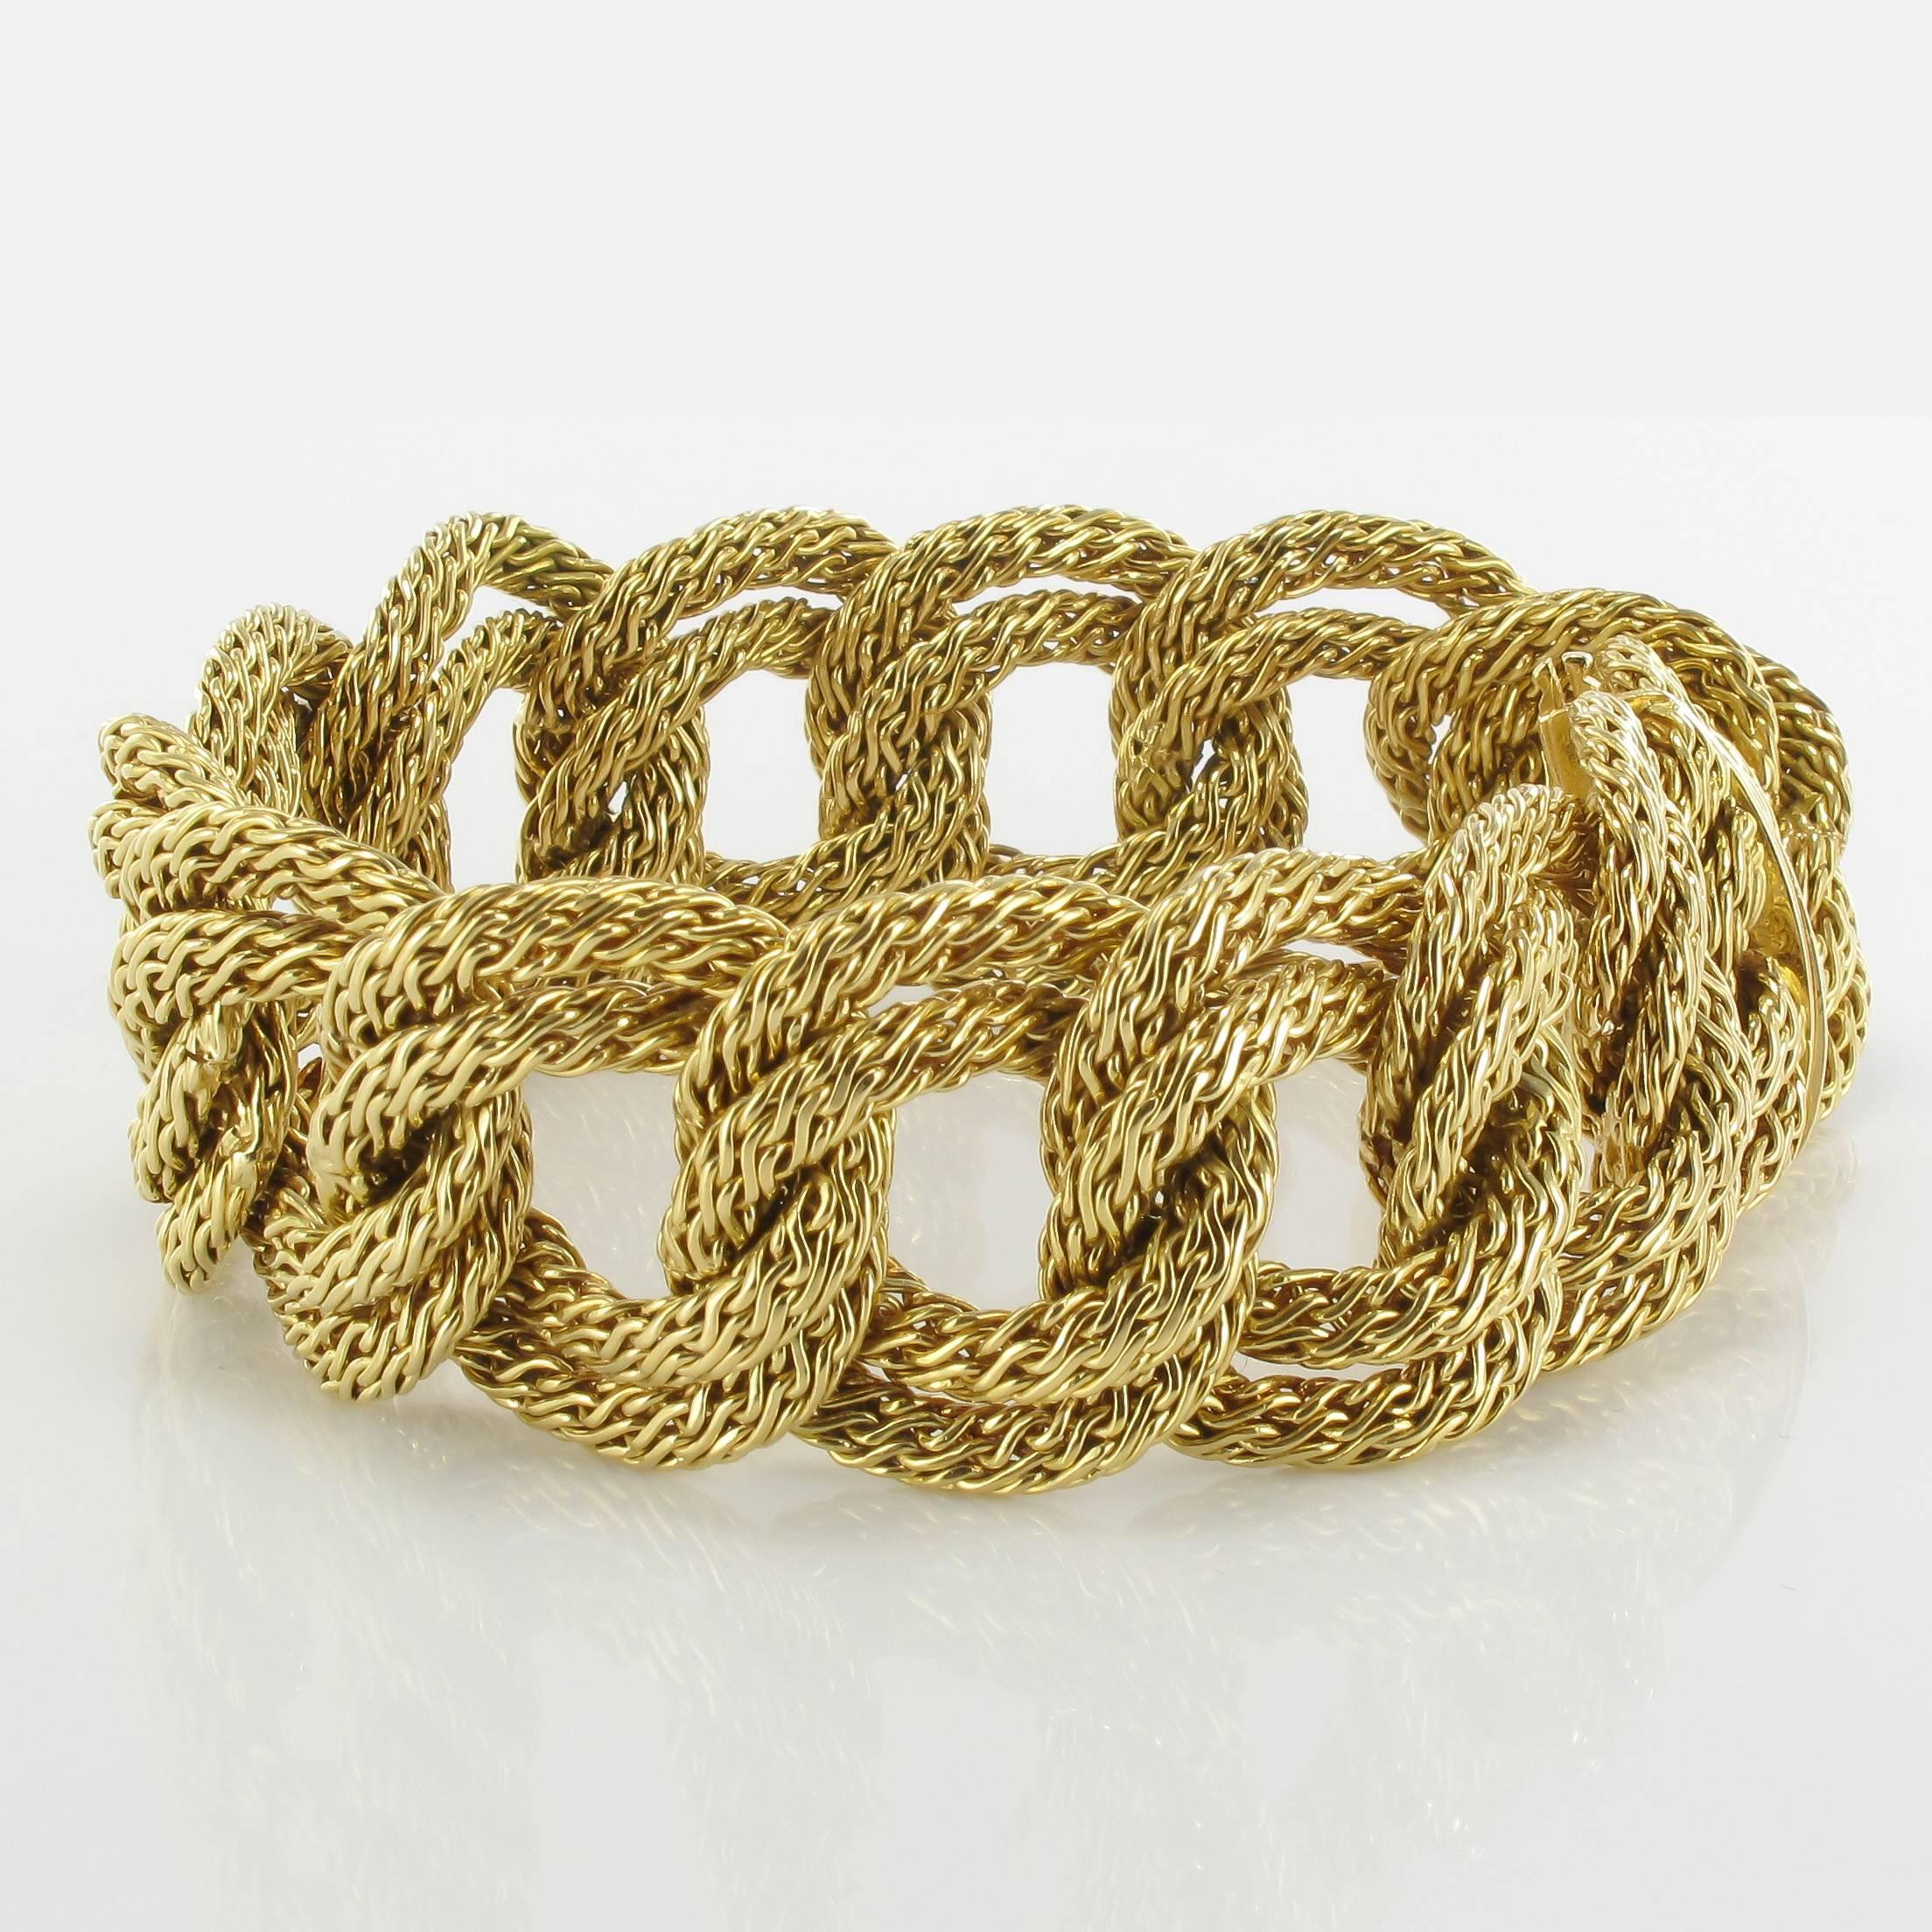 Bracelet in 18 karat yellow gold, eagle head hallmark. 
Splendid retro bracelet composed of double gold braid links. The hinge clasp has a safety feature. 
Authentic vintage bracelet - French work of the 1960s.
Length: 20.2 cm, width: 2.5 cm.
Total